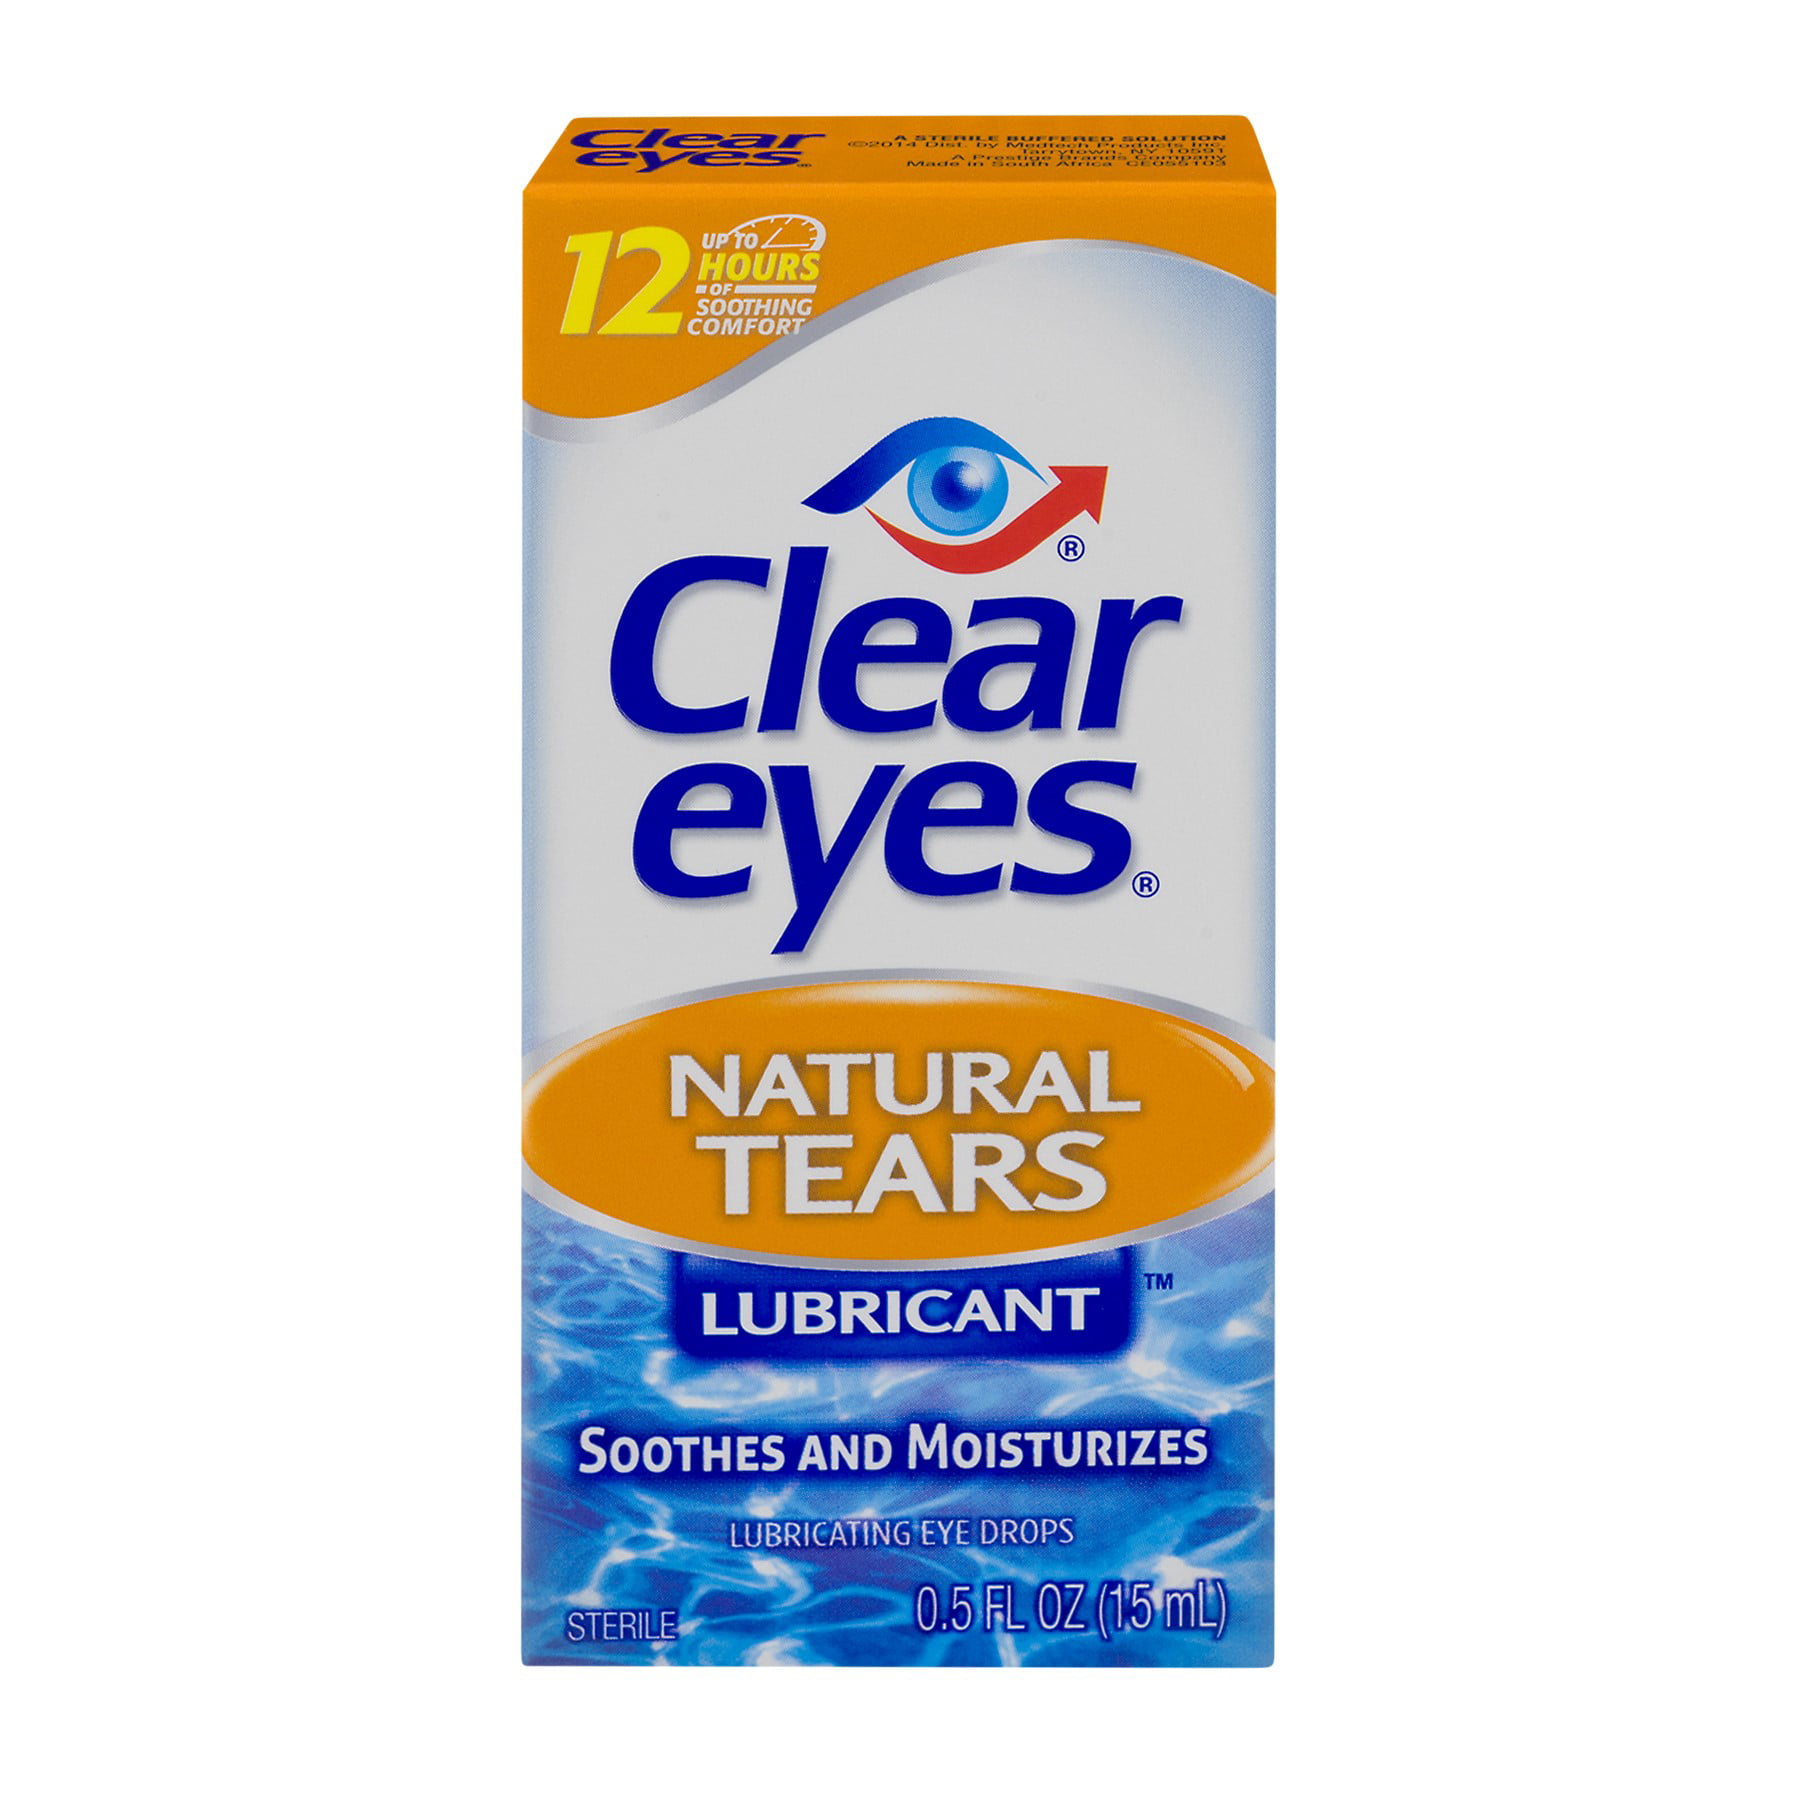 Clear eyes speed. Natural Eye Drops лубрикант. Clear Eyes natural tears капли для глаз. Natural tear Eye Drops. Natura tears.